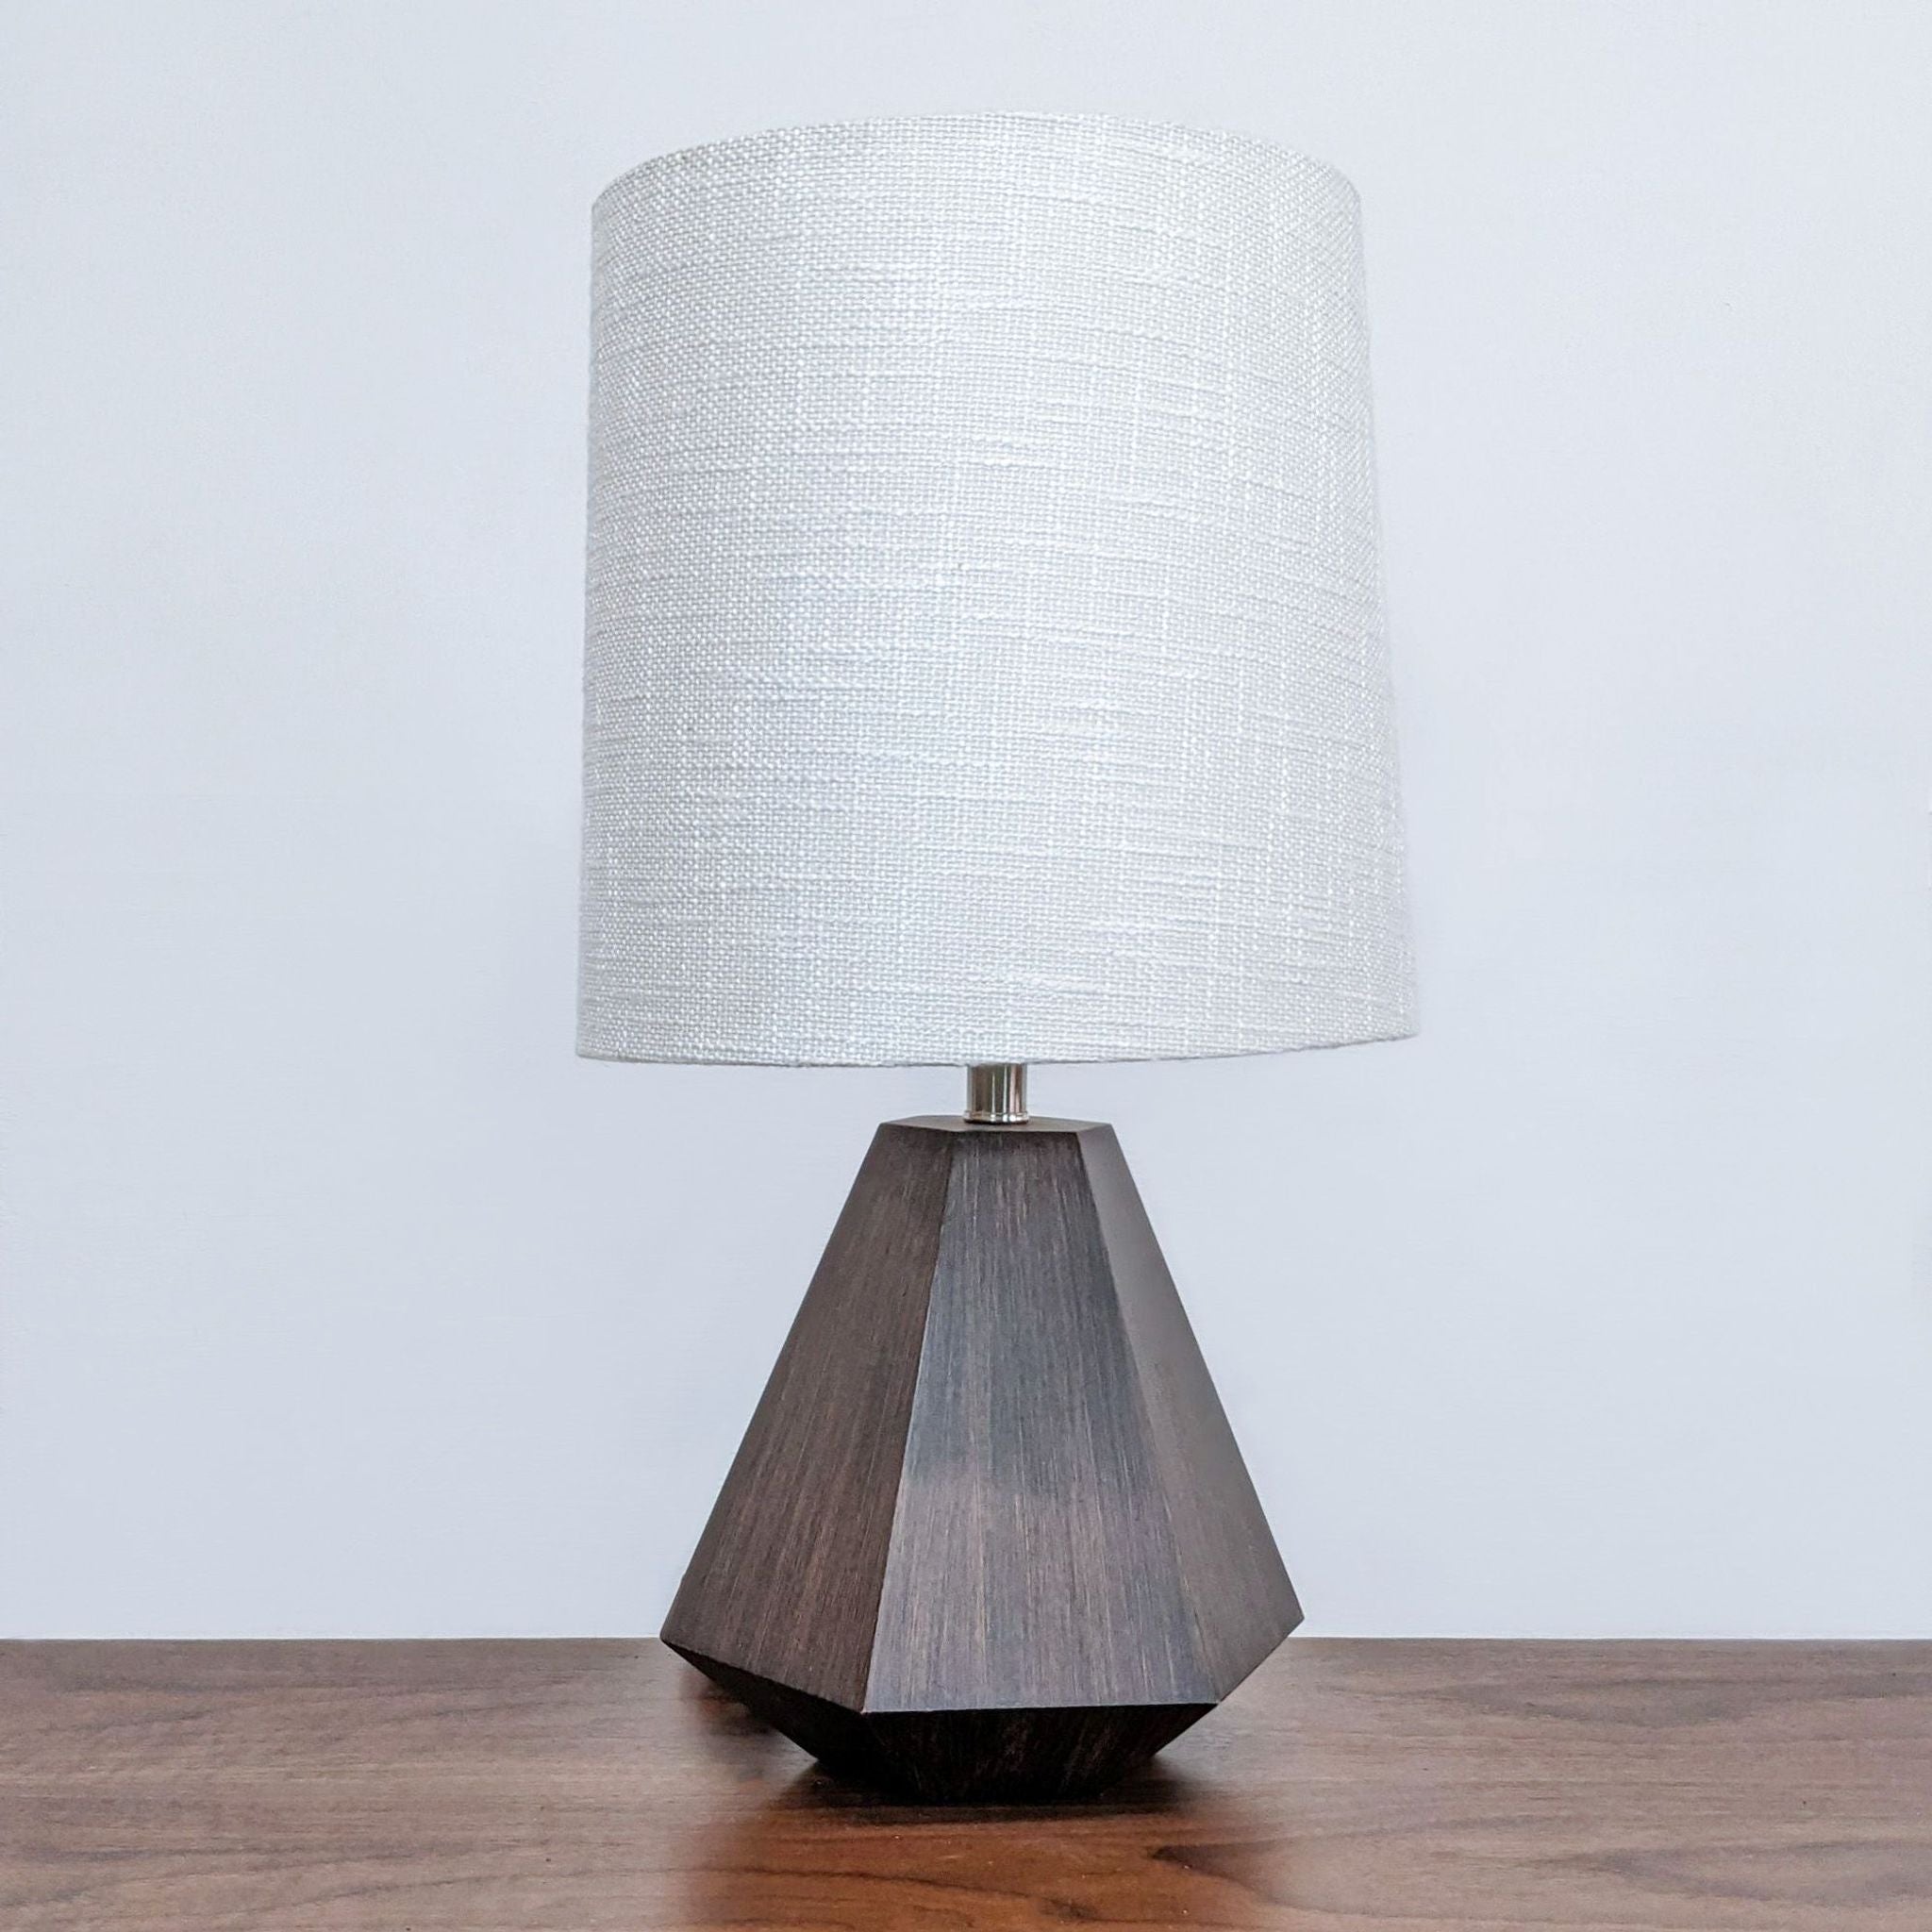 Reperch brand table lamp with a textured white shade and a geometric wooden base on a table.